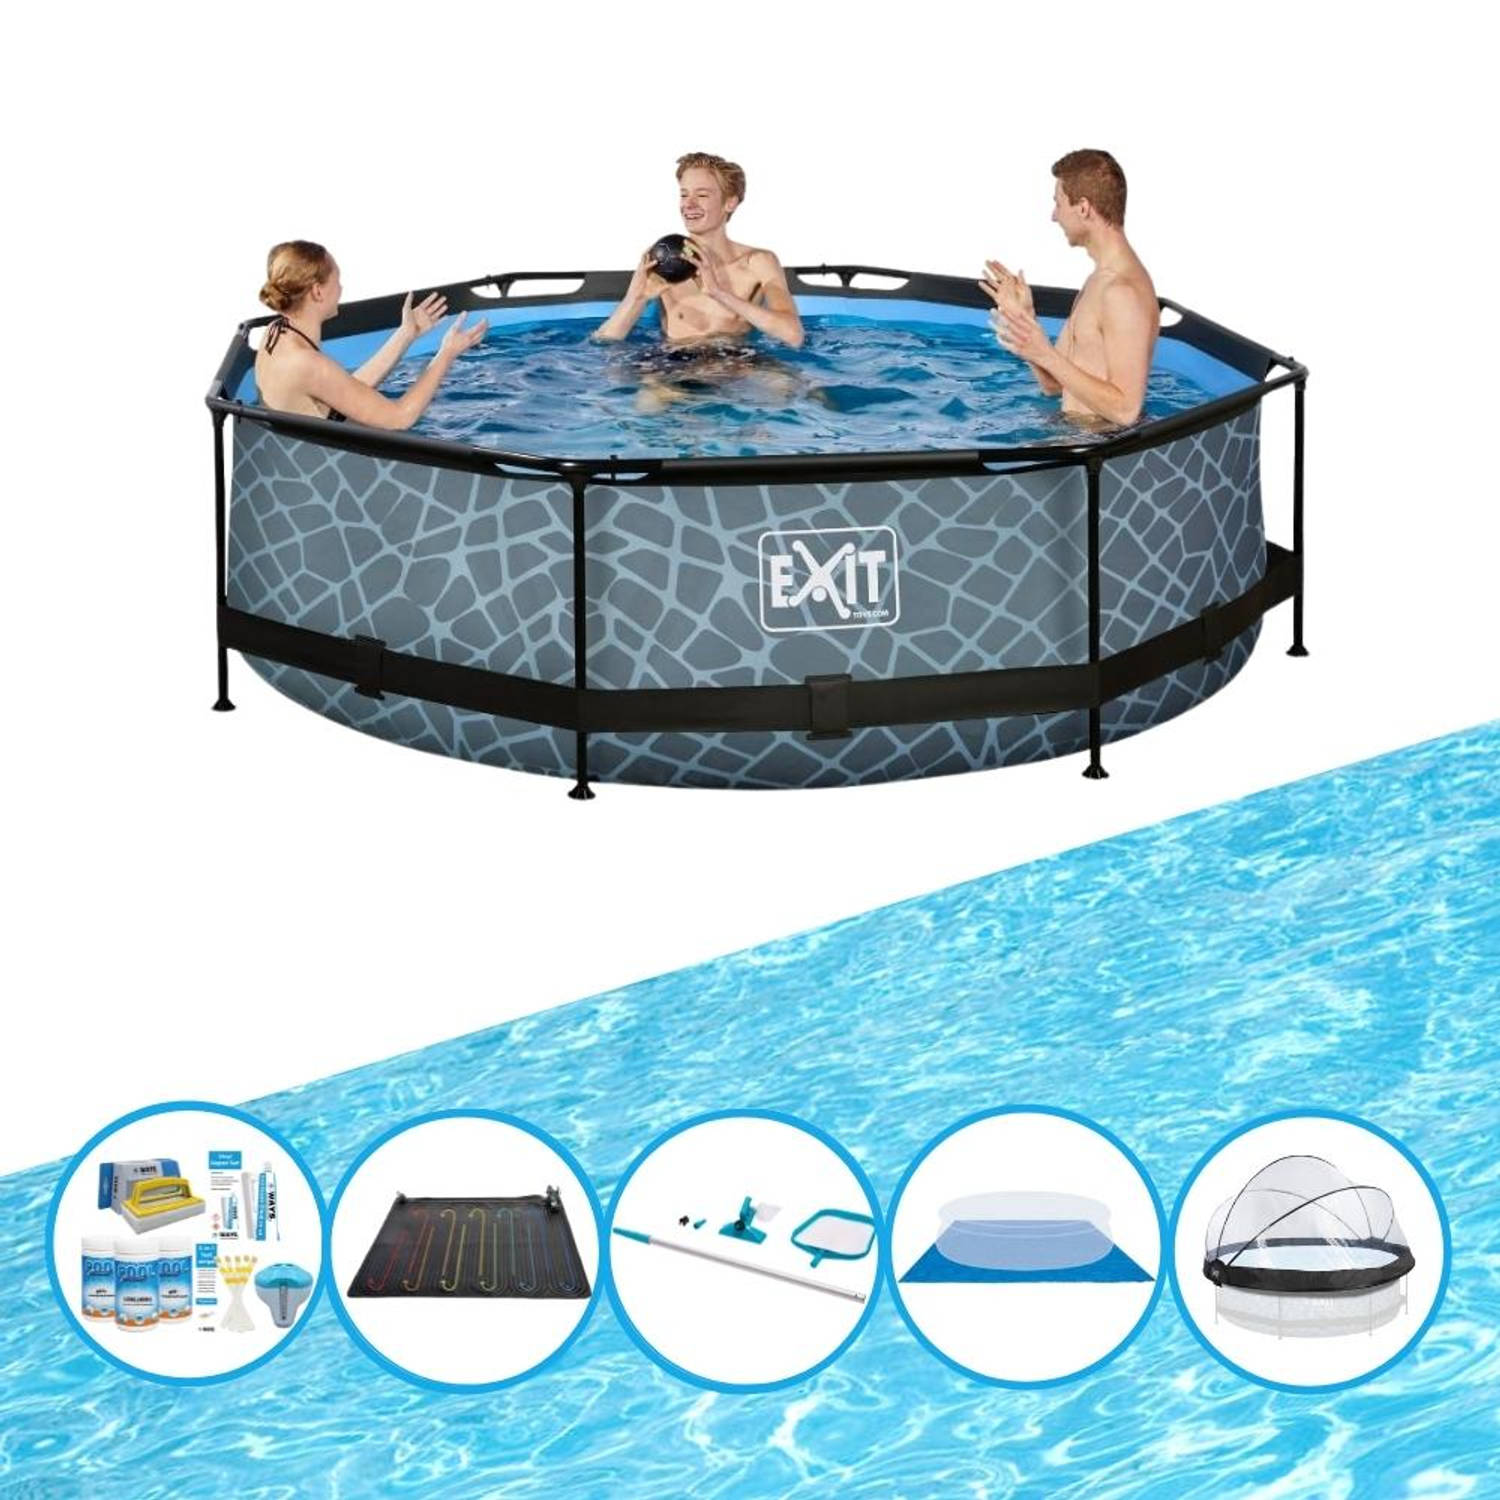 EXIT Zwembad Stone Grey - ø300x76 cm - Frame Pool - Inclusief accessoires